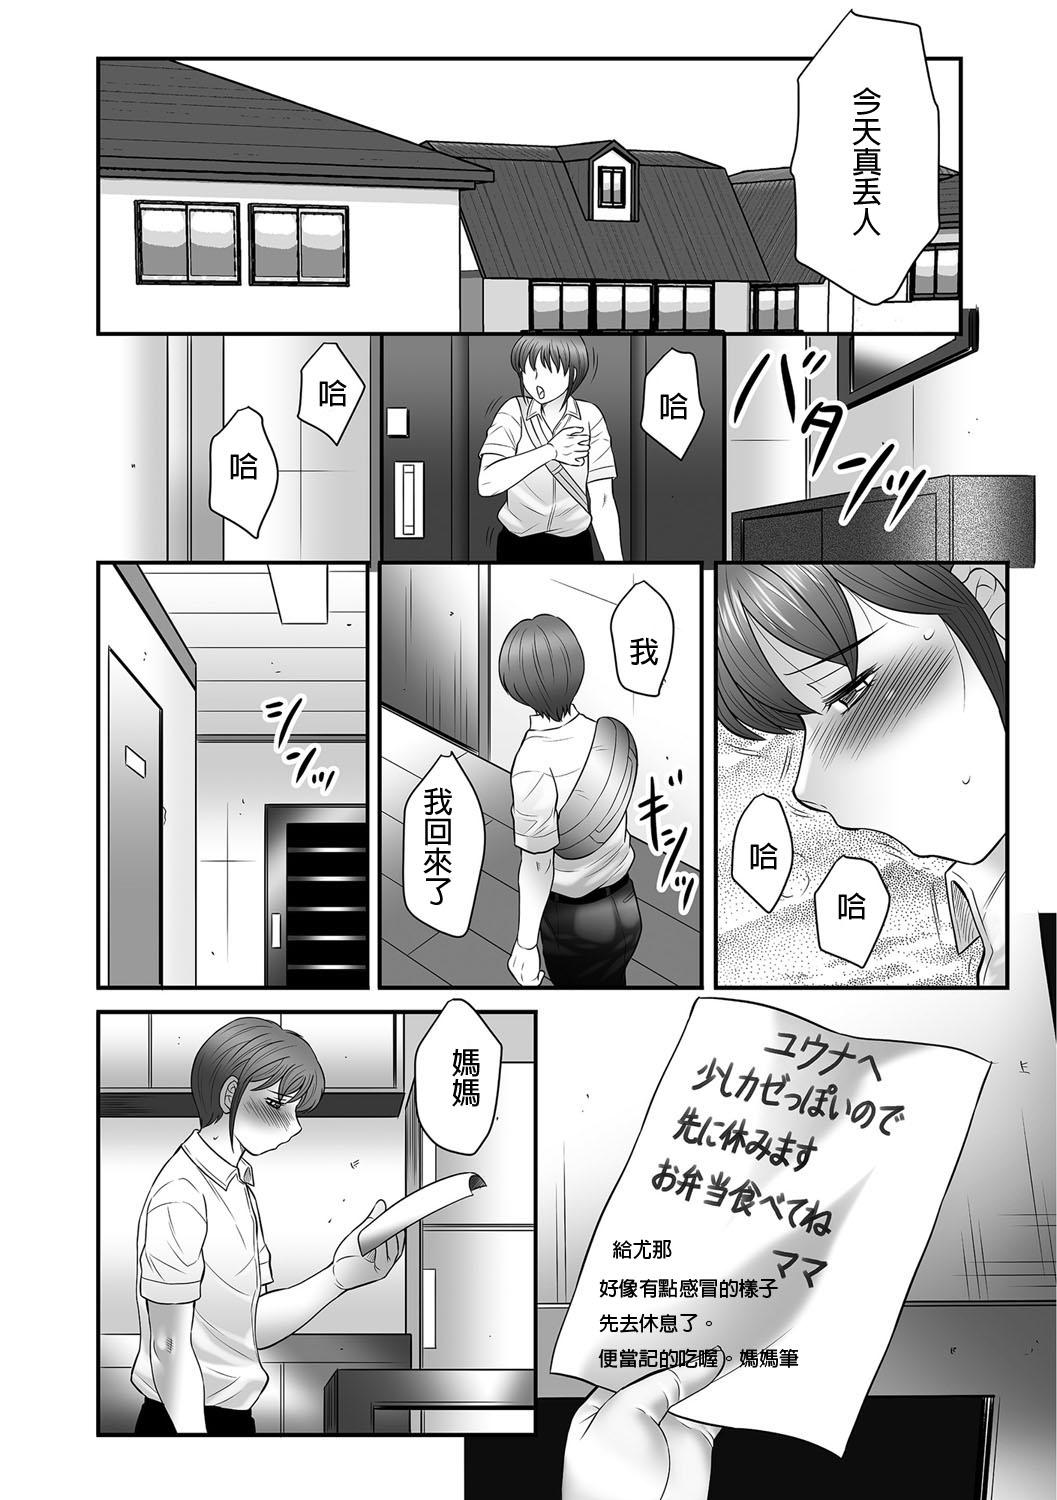 [Fuusen Club] Boshi no Susume - The advice of the mother and child Ch. 9-10 13